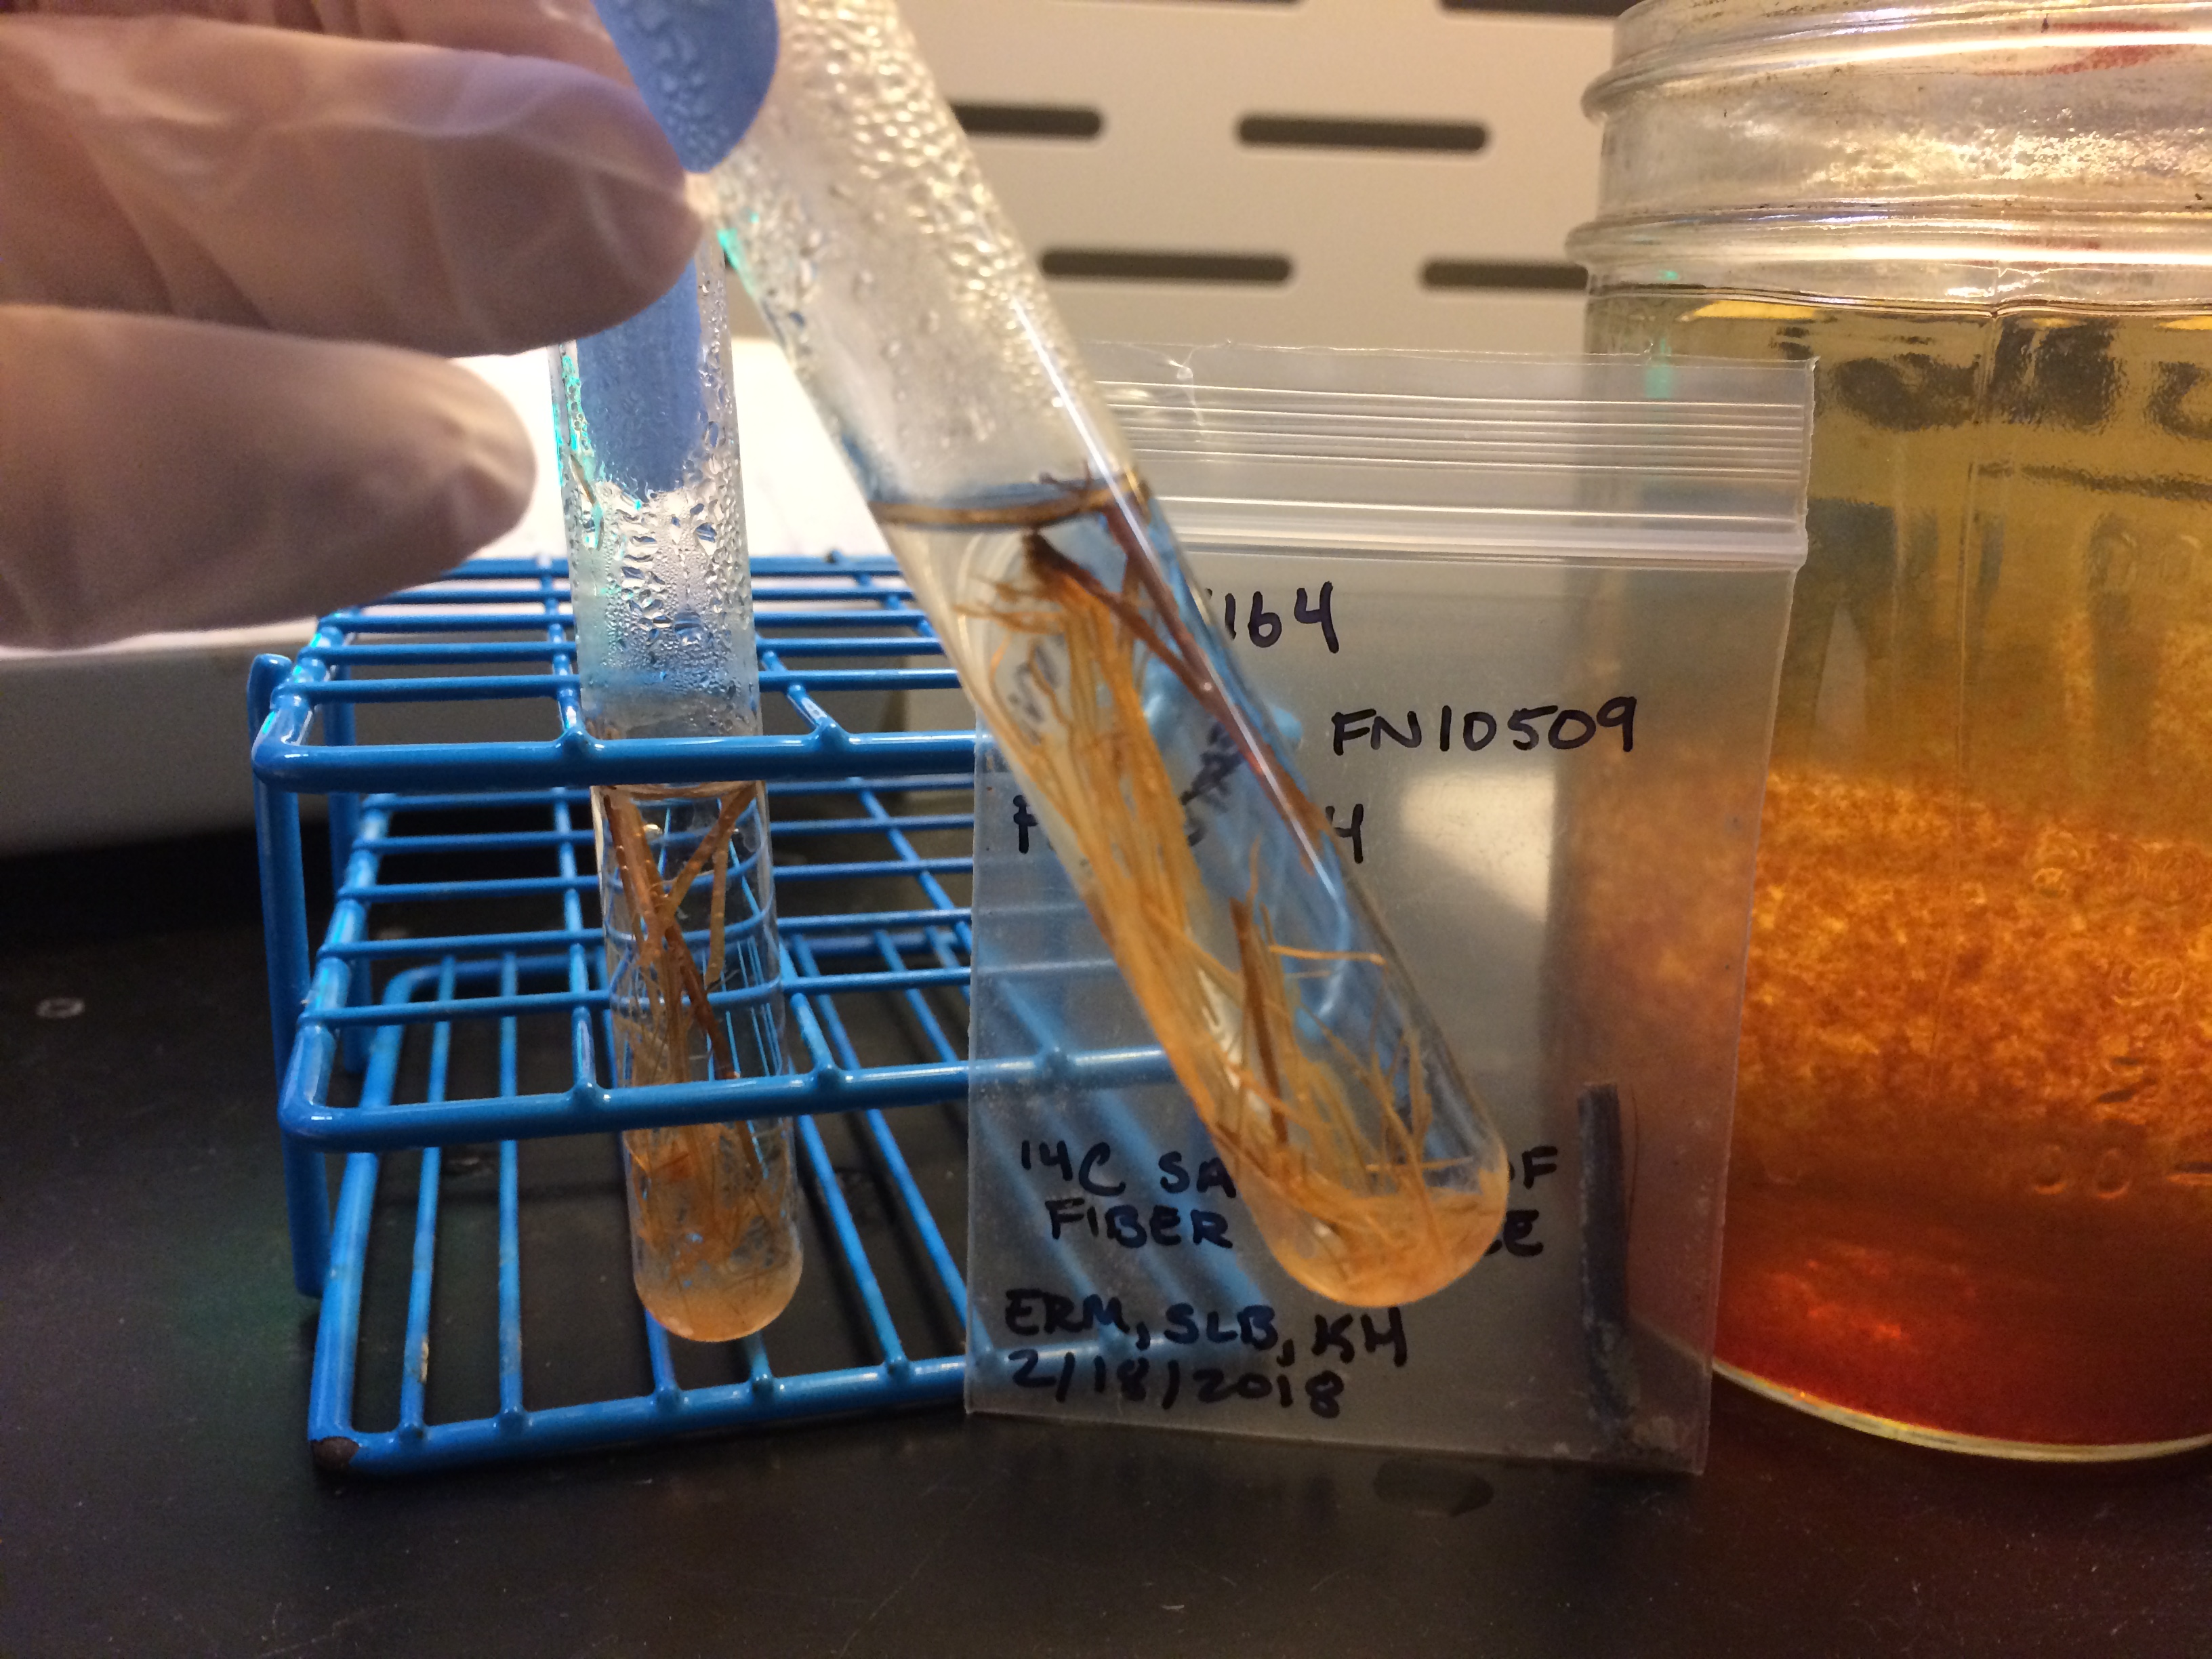 agave fibers in a glass test tube held in a gloved hand. In the background are more test tubes in a blue rack, a larger glass container of brownish liquid, and a small plastic bag labeled with provinience information.